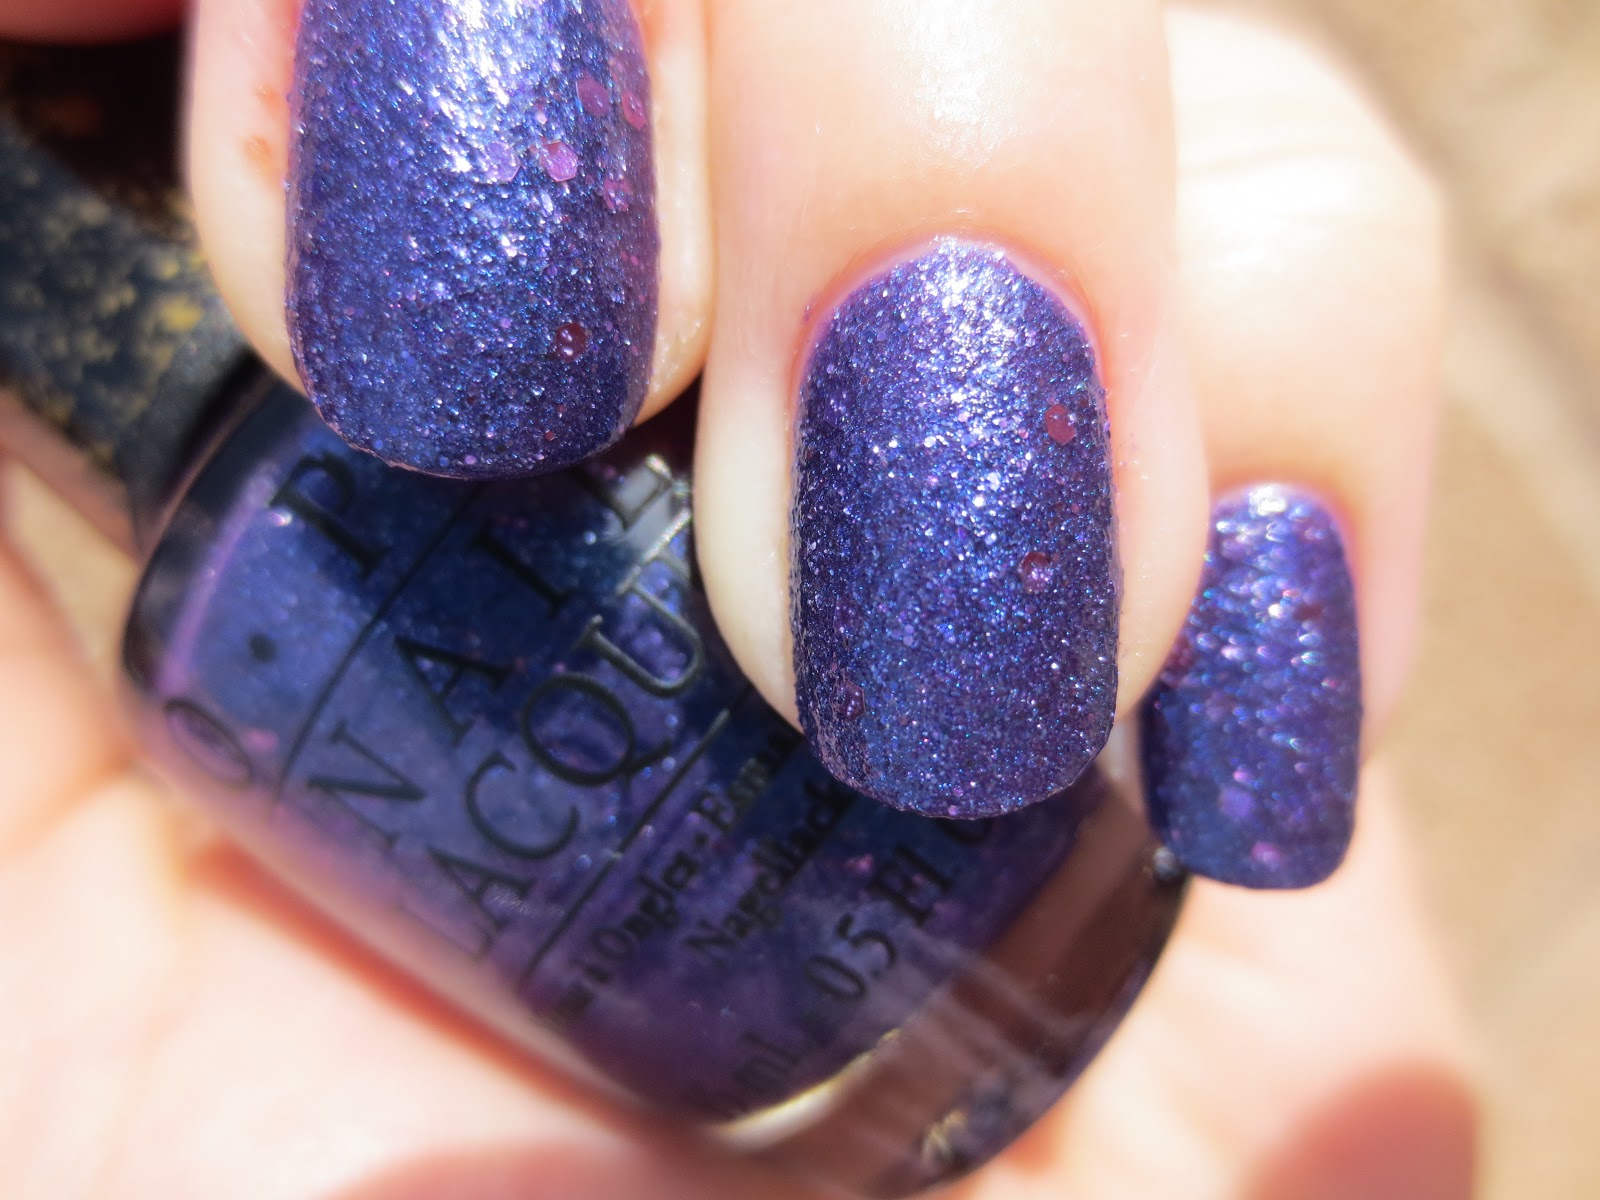 1. OPI Liquid Sand Nail Polish in "Can't Let Go" - wide 11